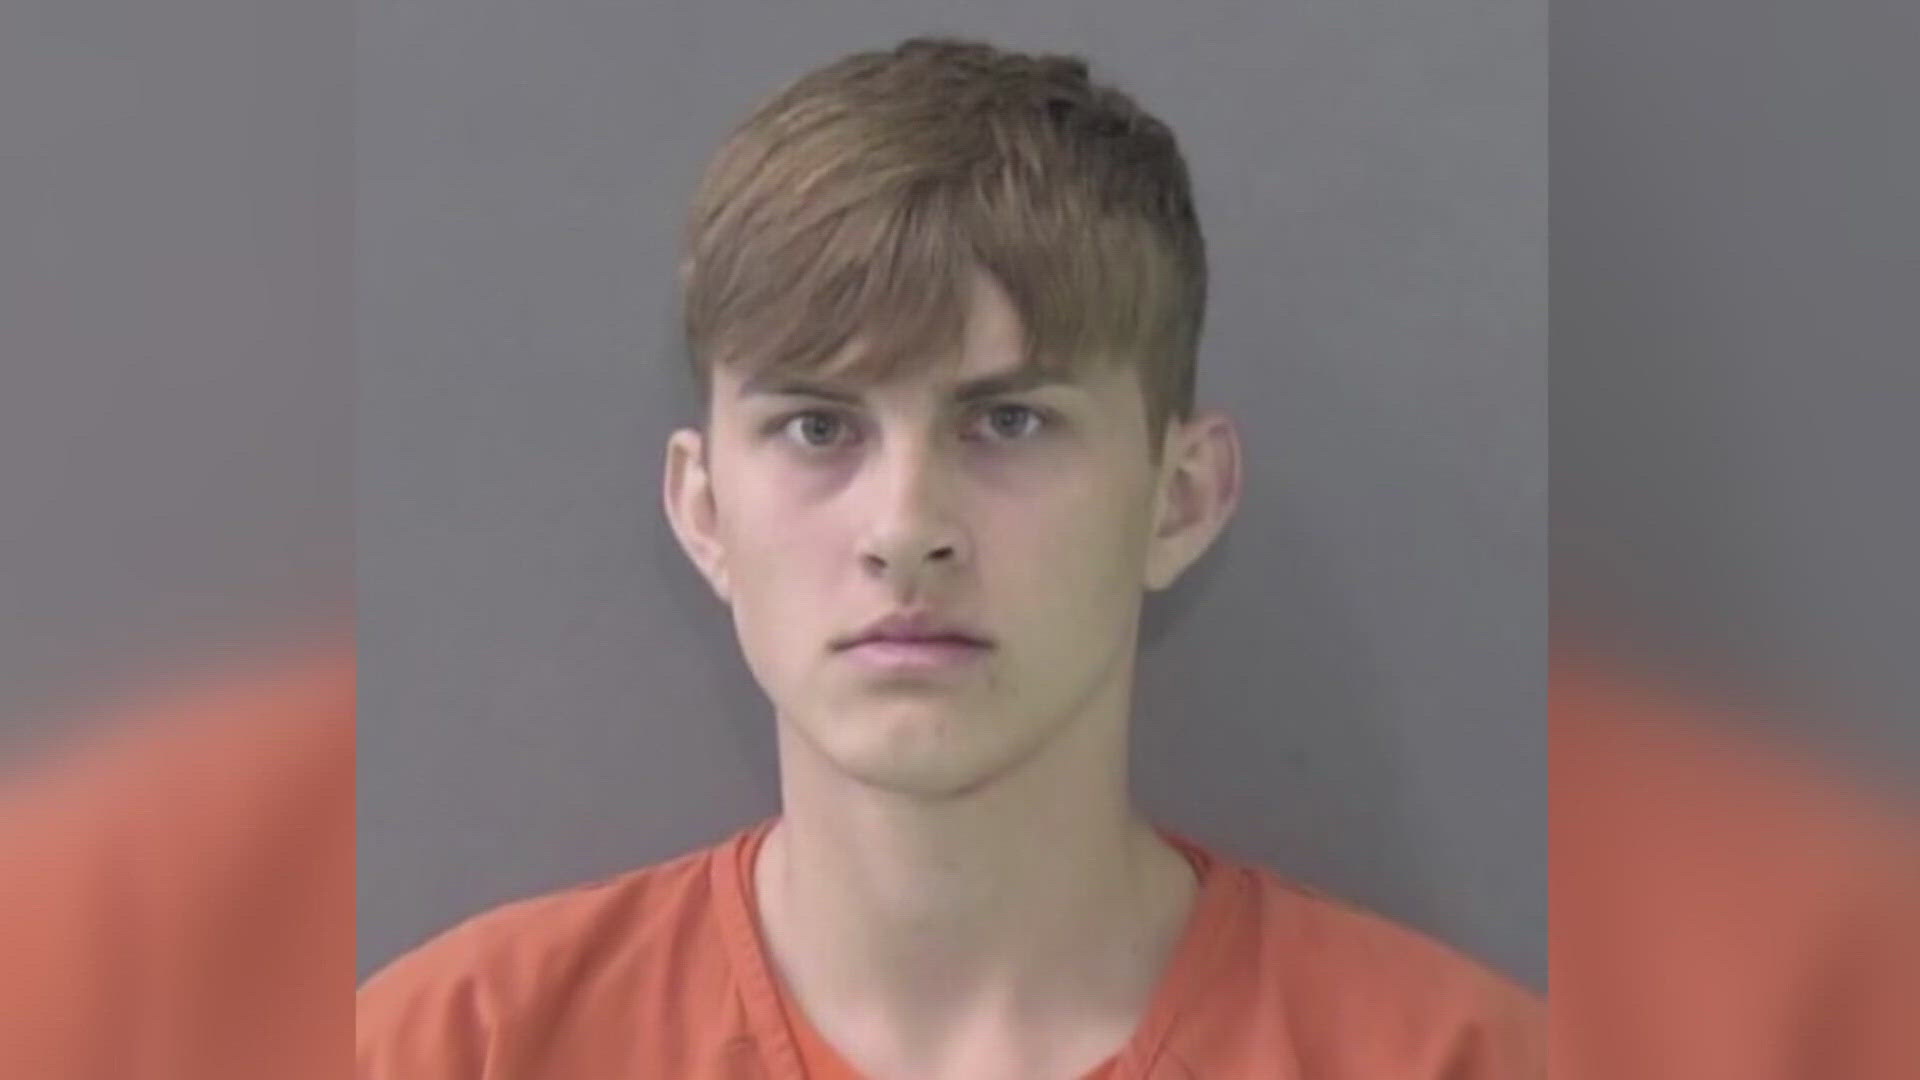 Caysen Allison was charged with murder after he reportedly stabbed Joe Ramirez, 18, multiple times in a Belton High School bathroom.